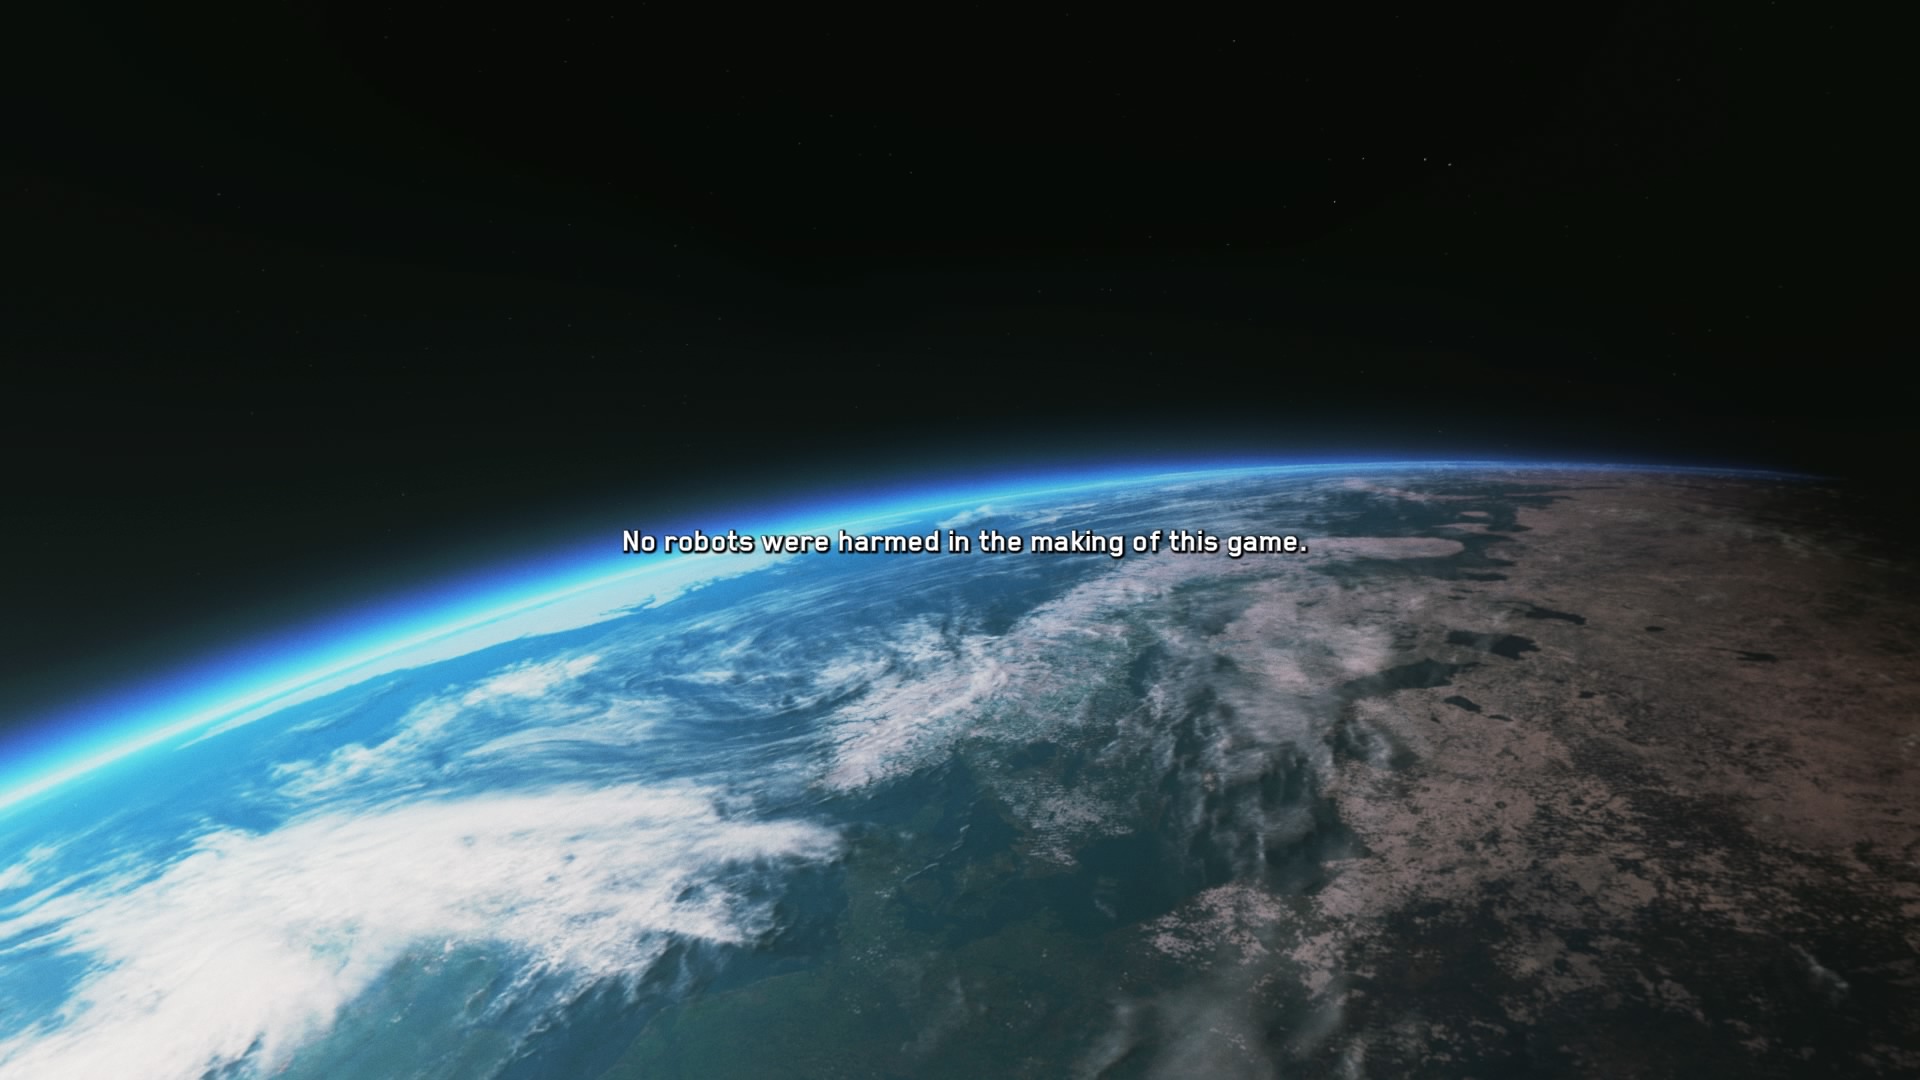 End Credits screen from Call of Duty: Infinite Warfare